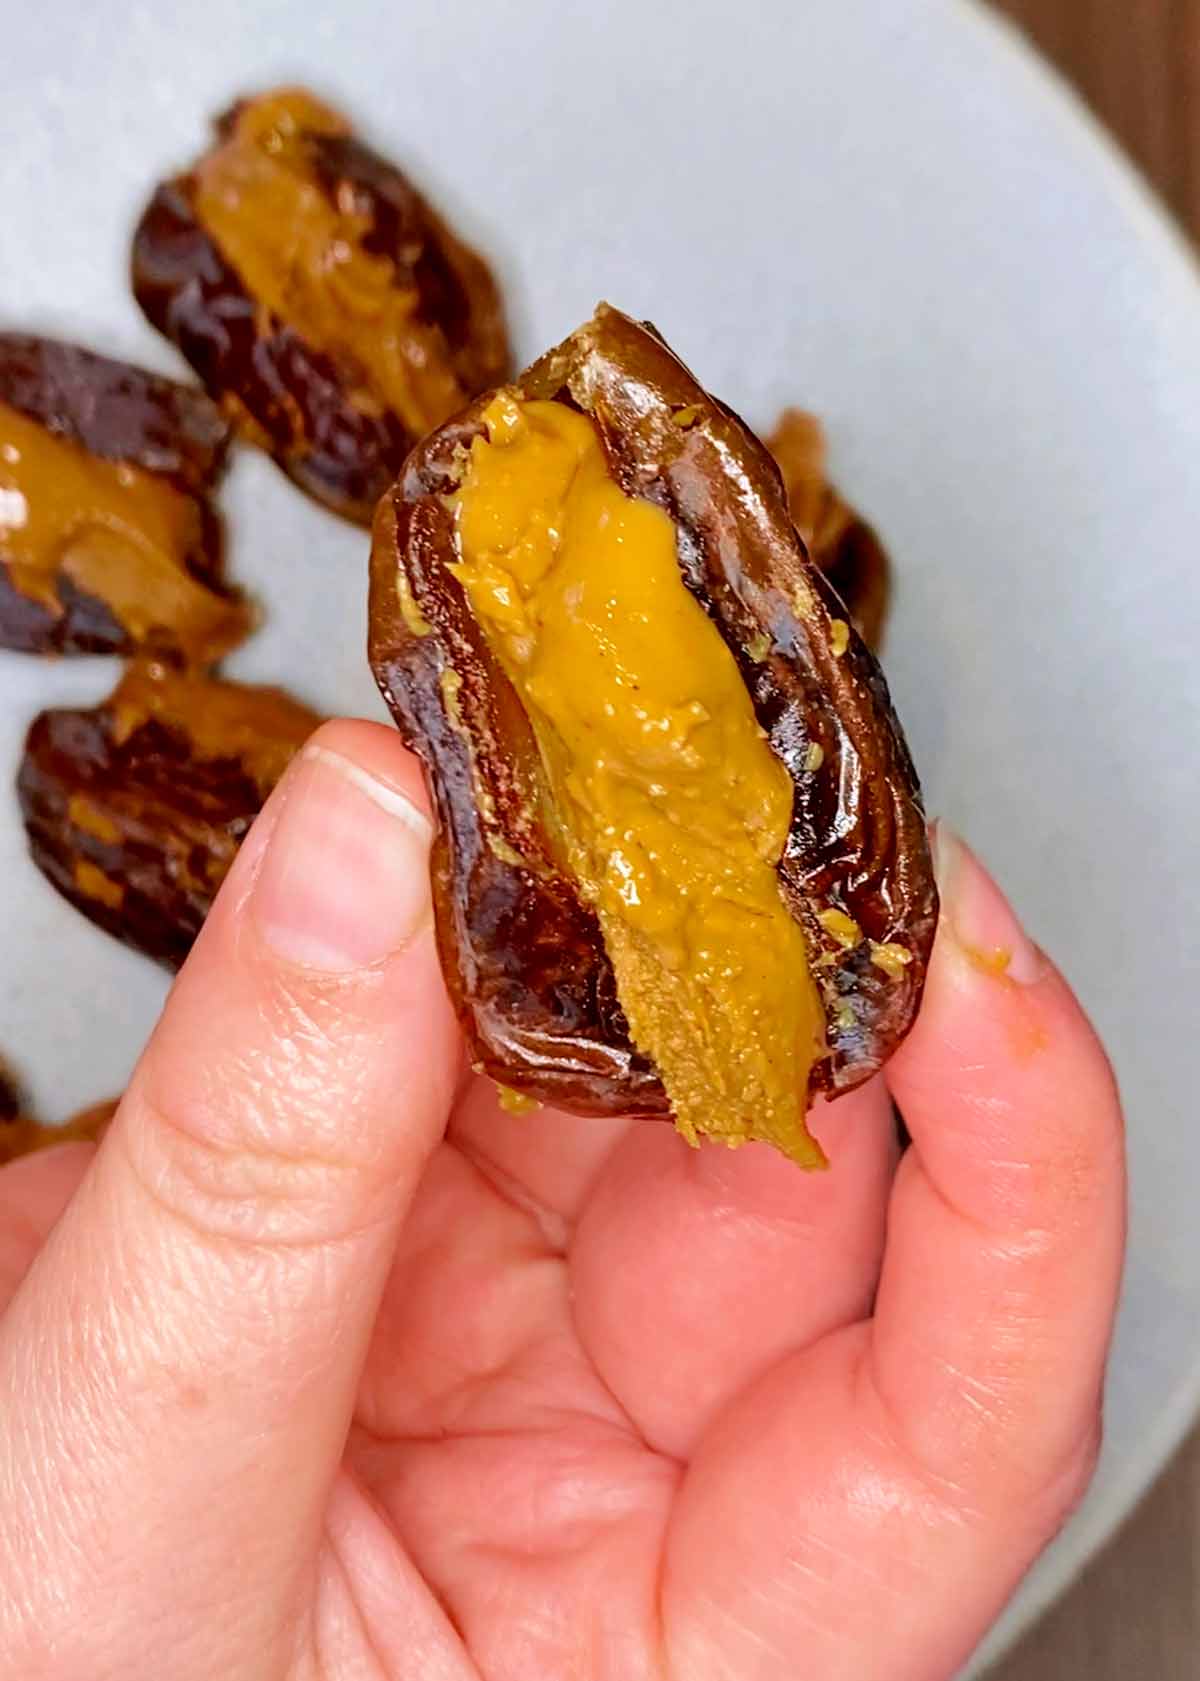 A hand holding a date stuffed with peanut butter.